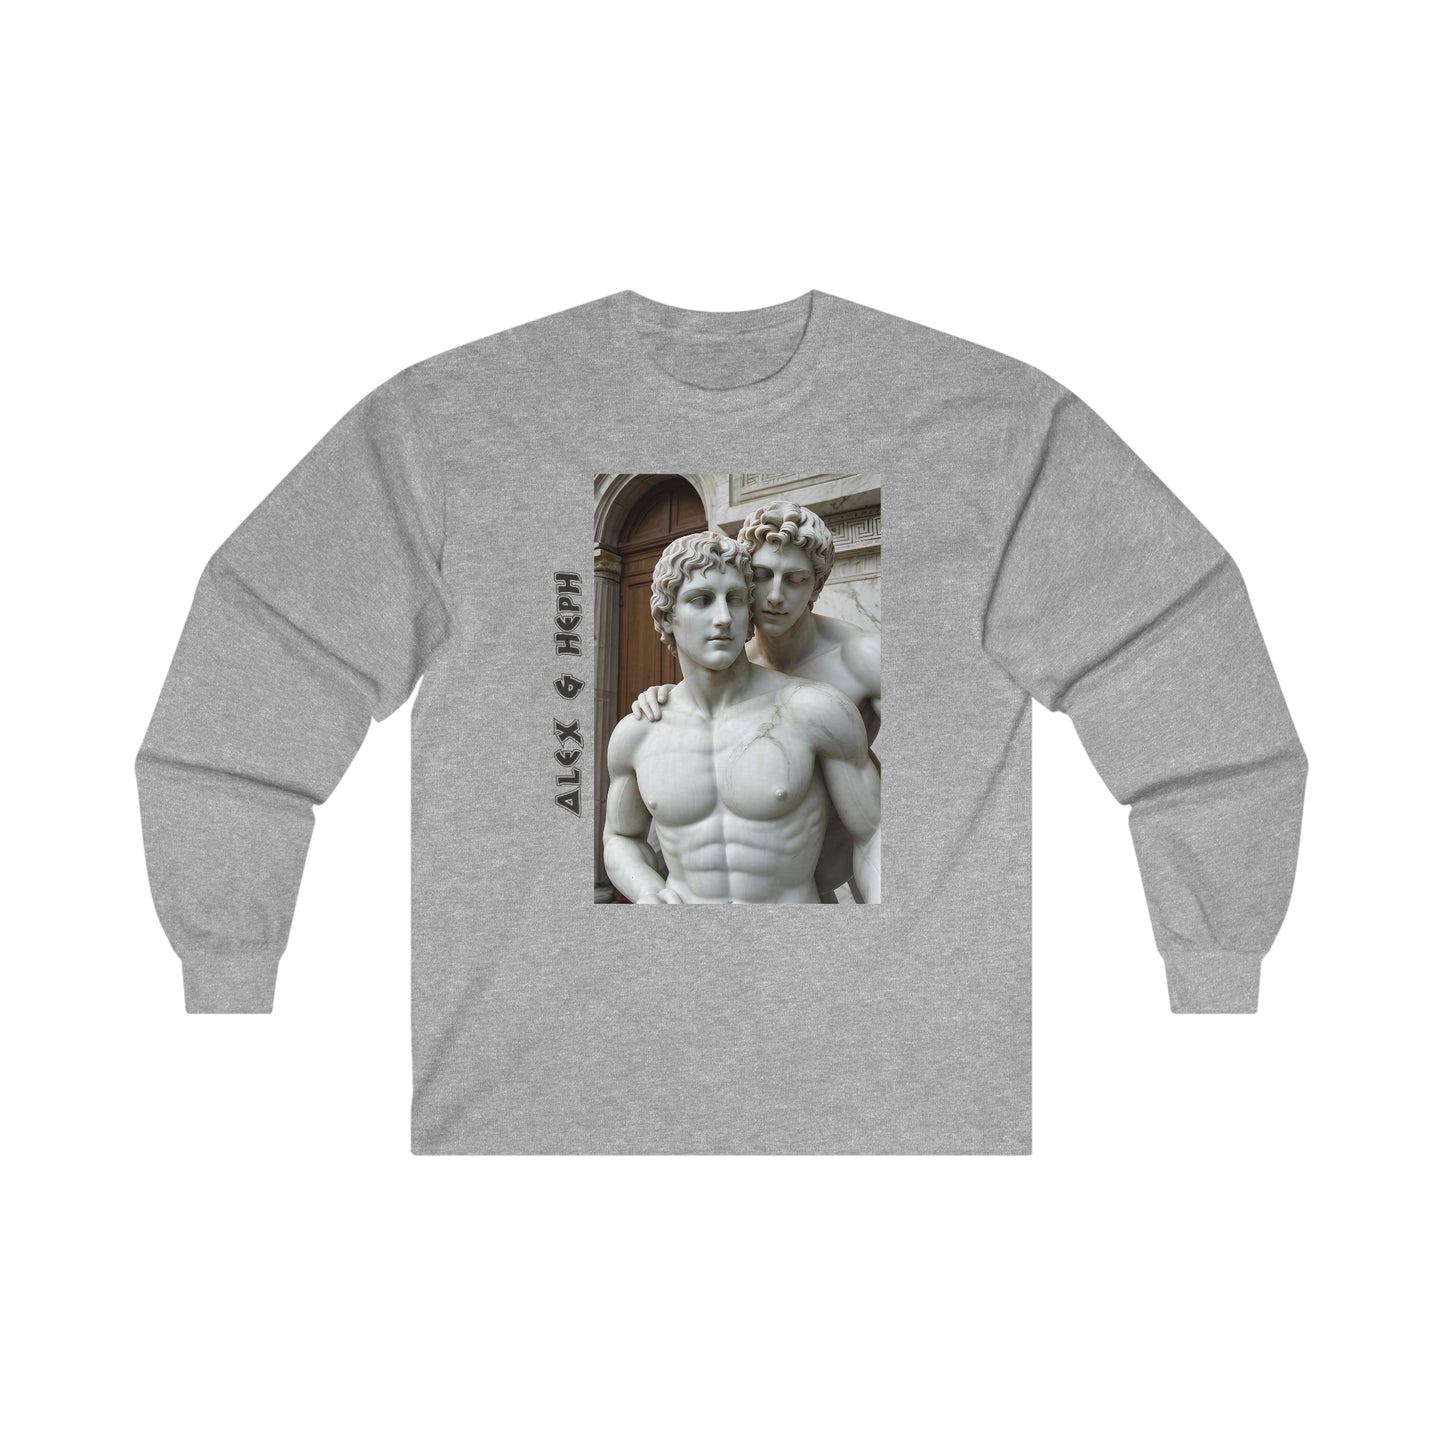 Alex & Heph Marble Statues - Alexander the Great and Hephaestion Ultra Cotton Long Sleeve T-Shirt